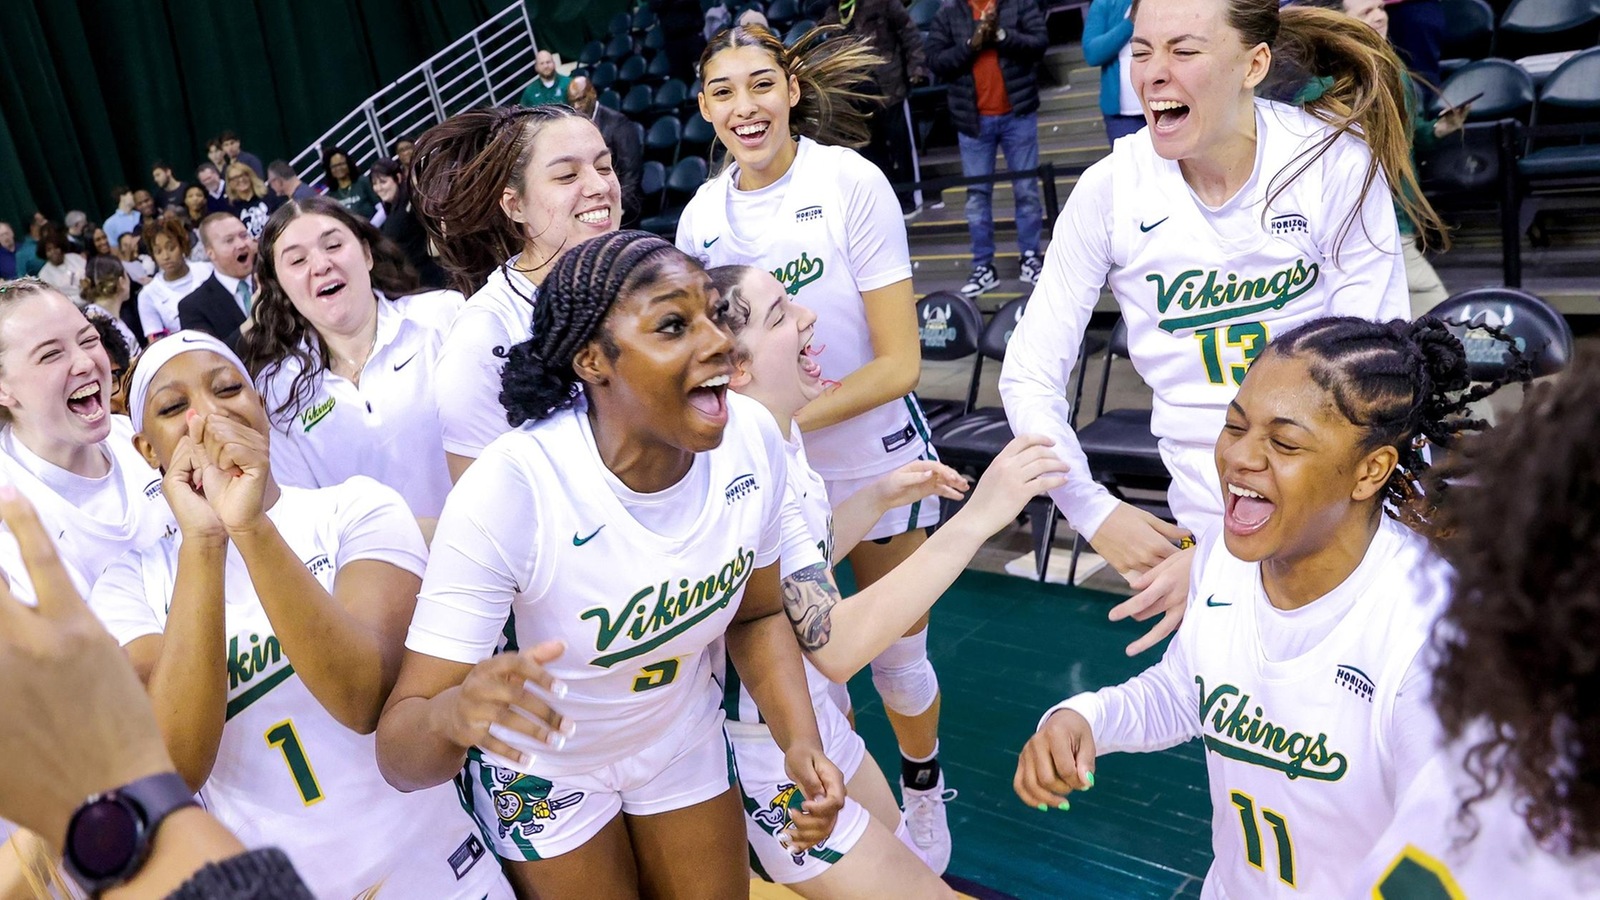 Cleveland State Women’s Basketball Enters #HLWBB Tournament As Top Seed